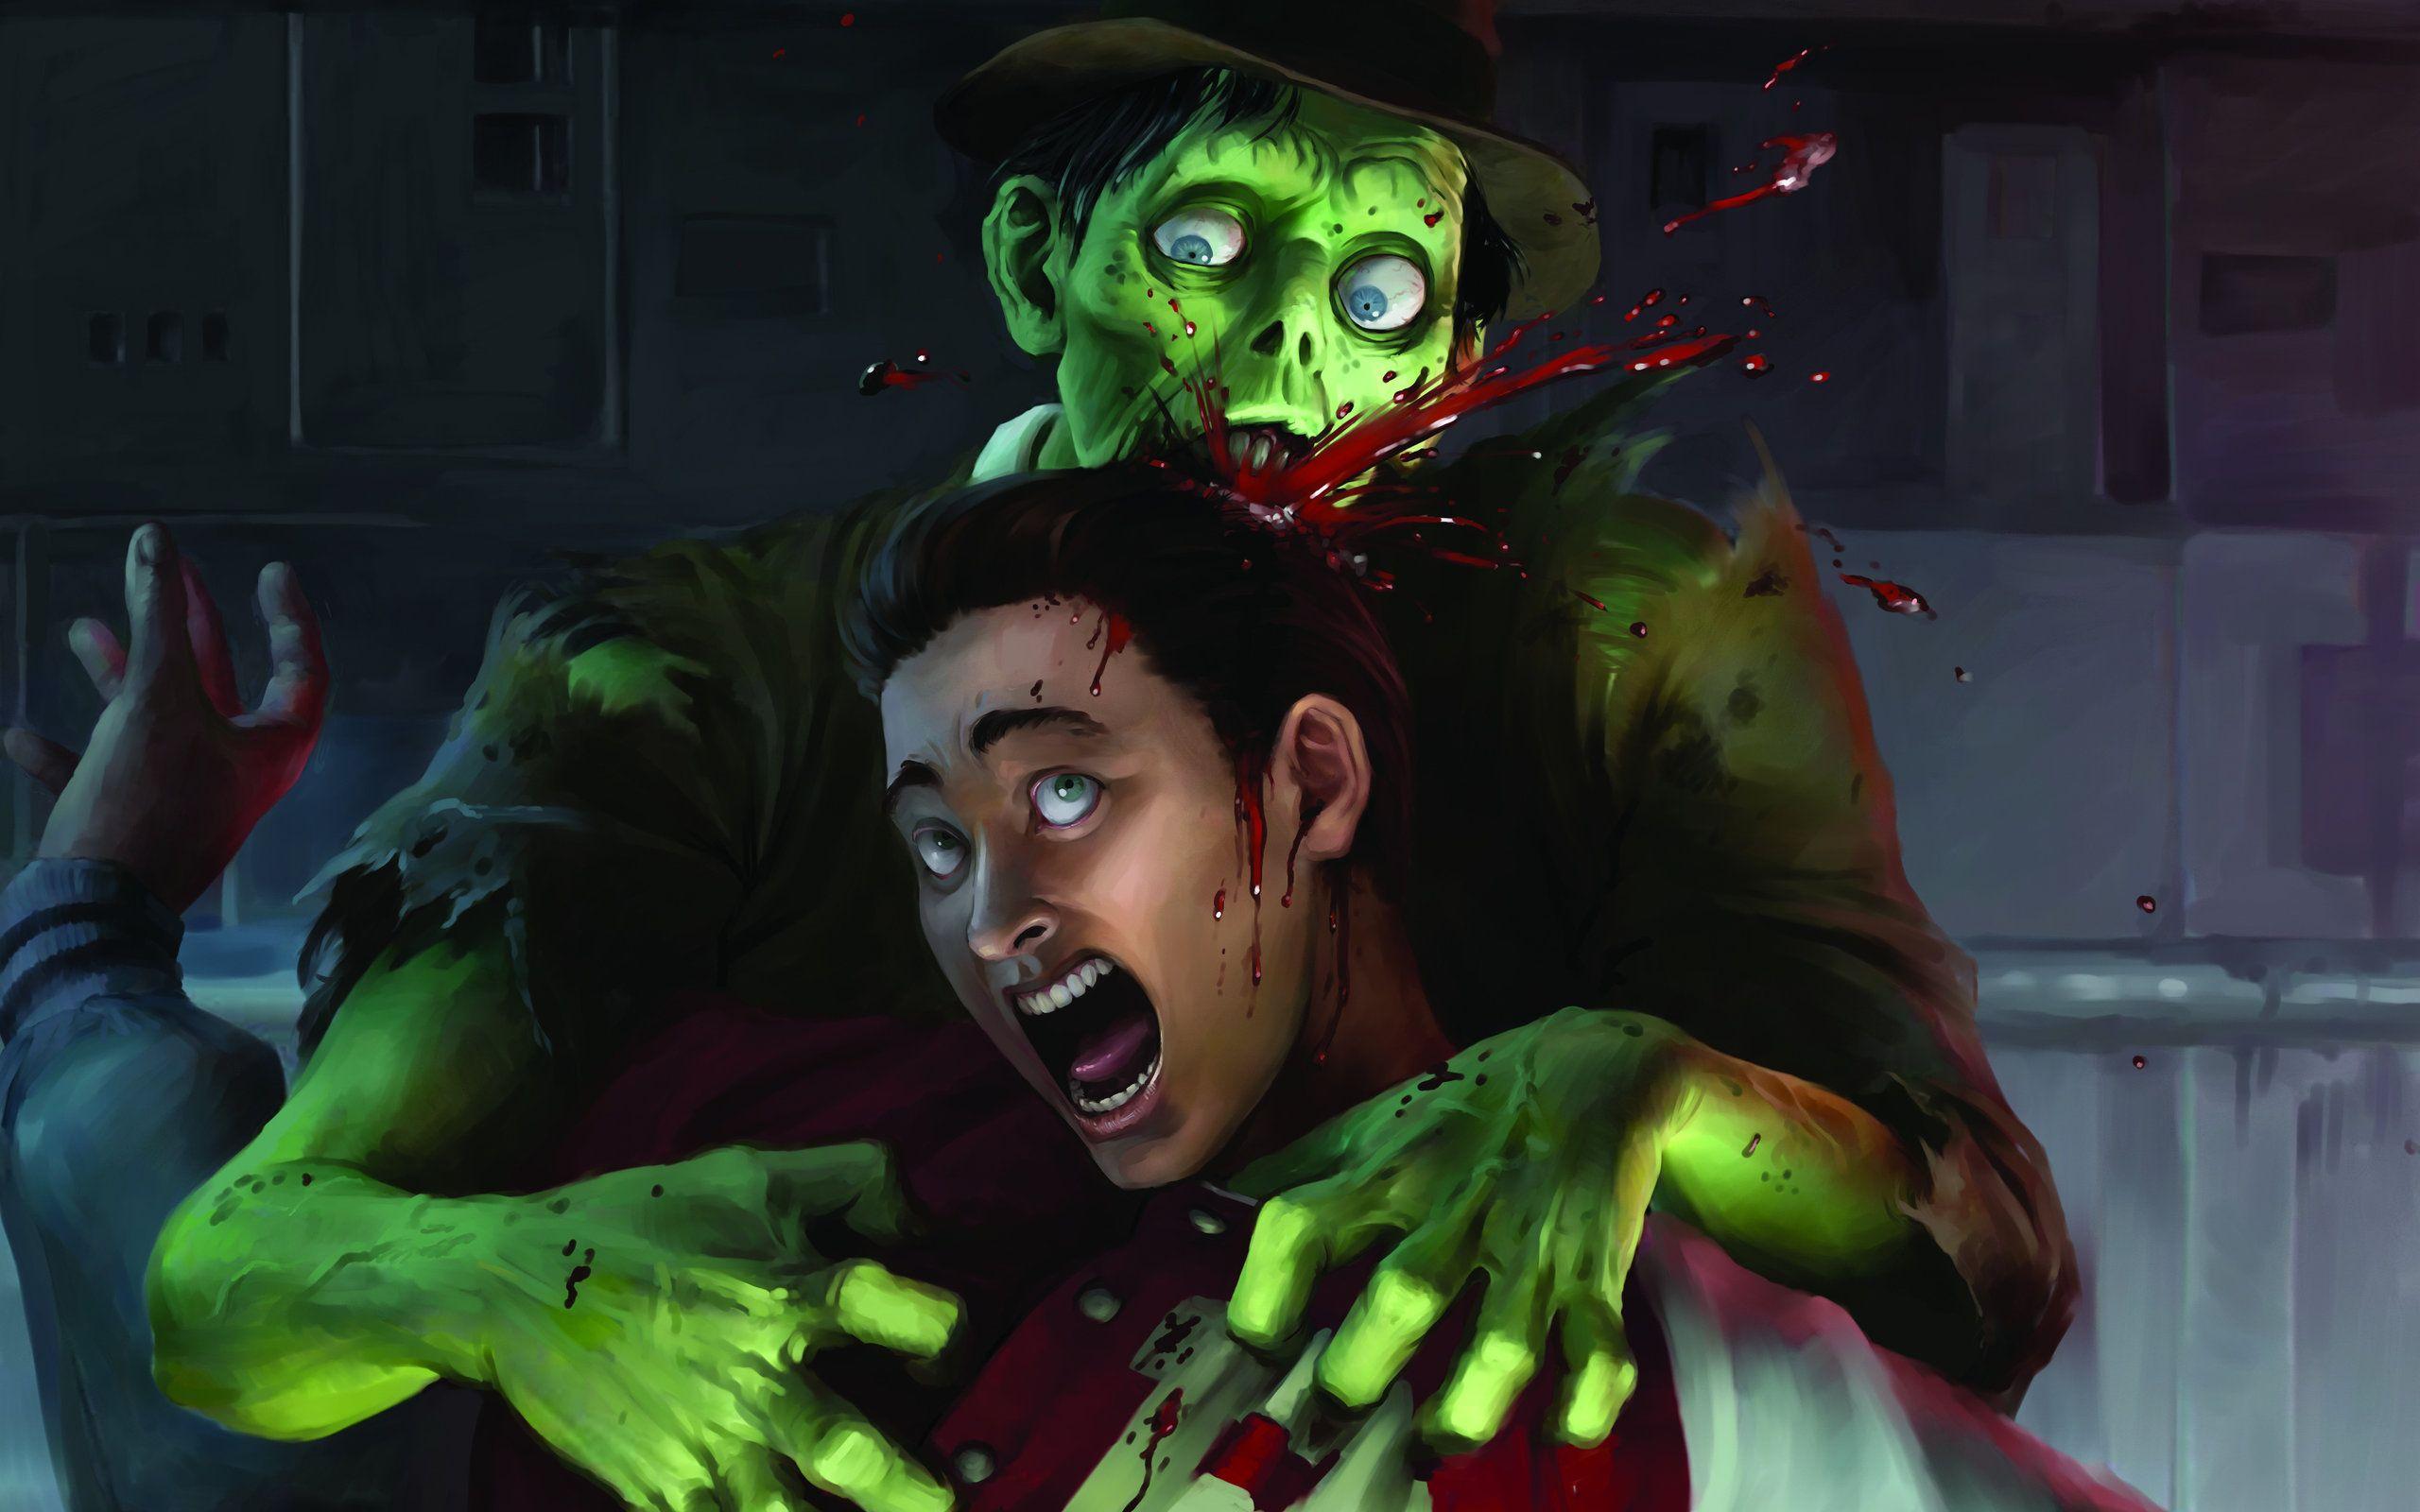 Stubbs the Zombie wallpaper and image, picture, photo